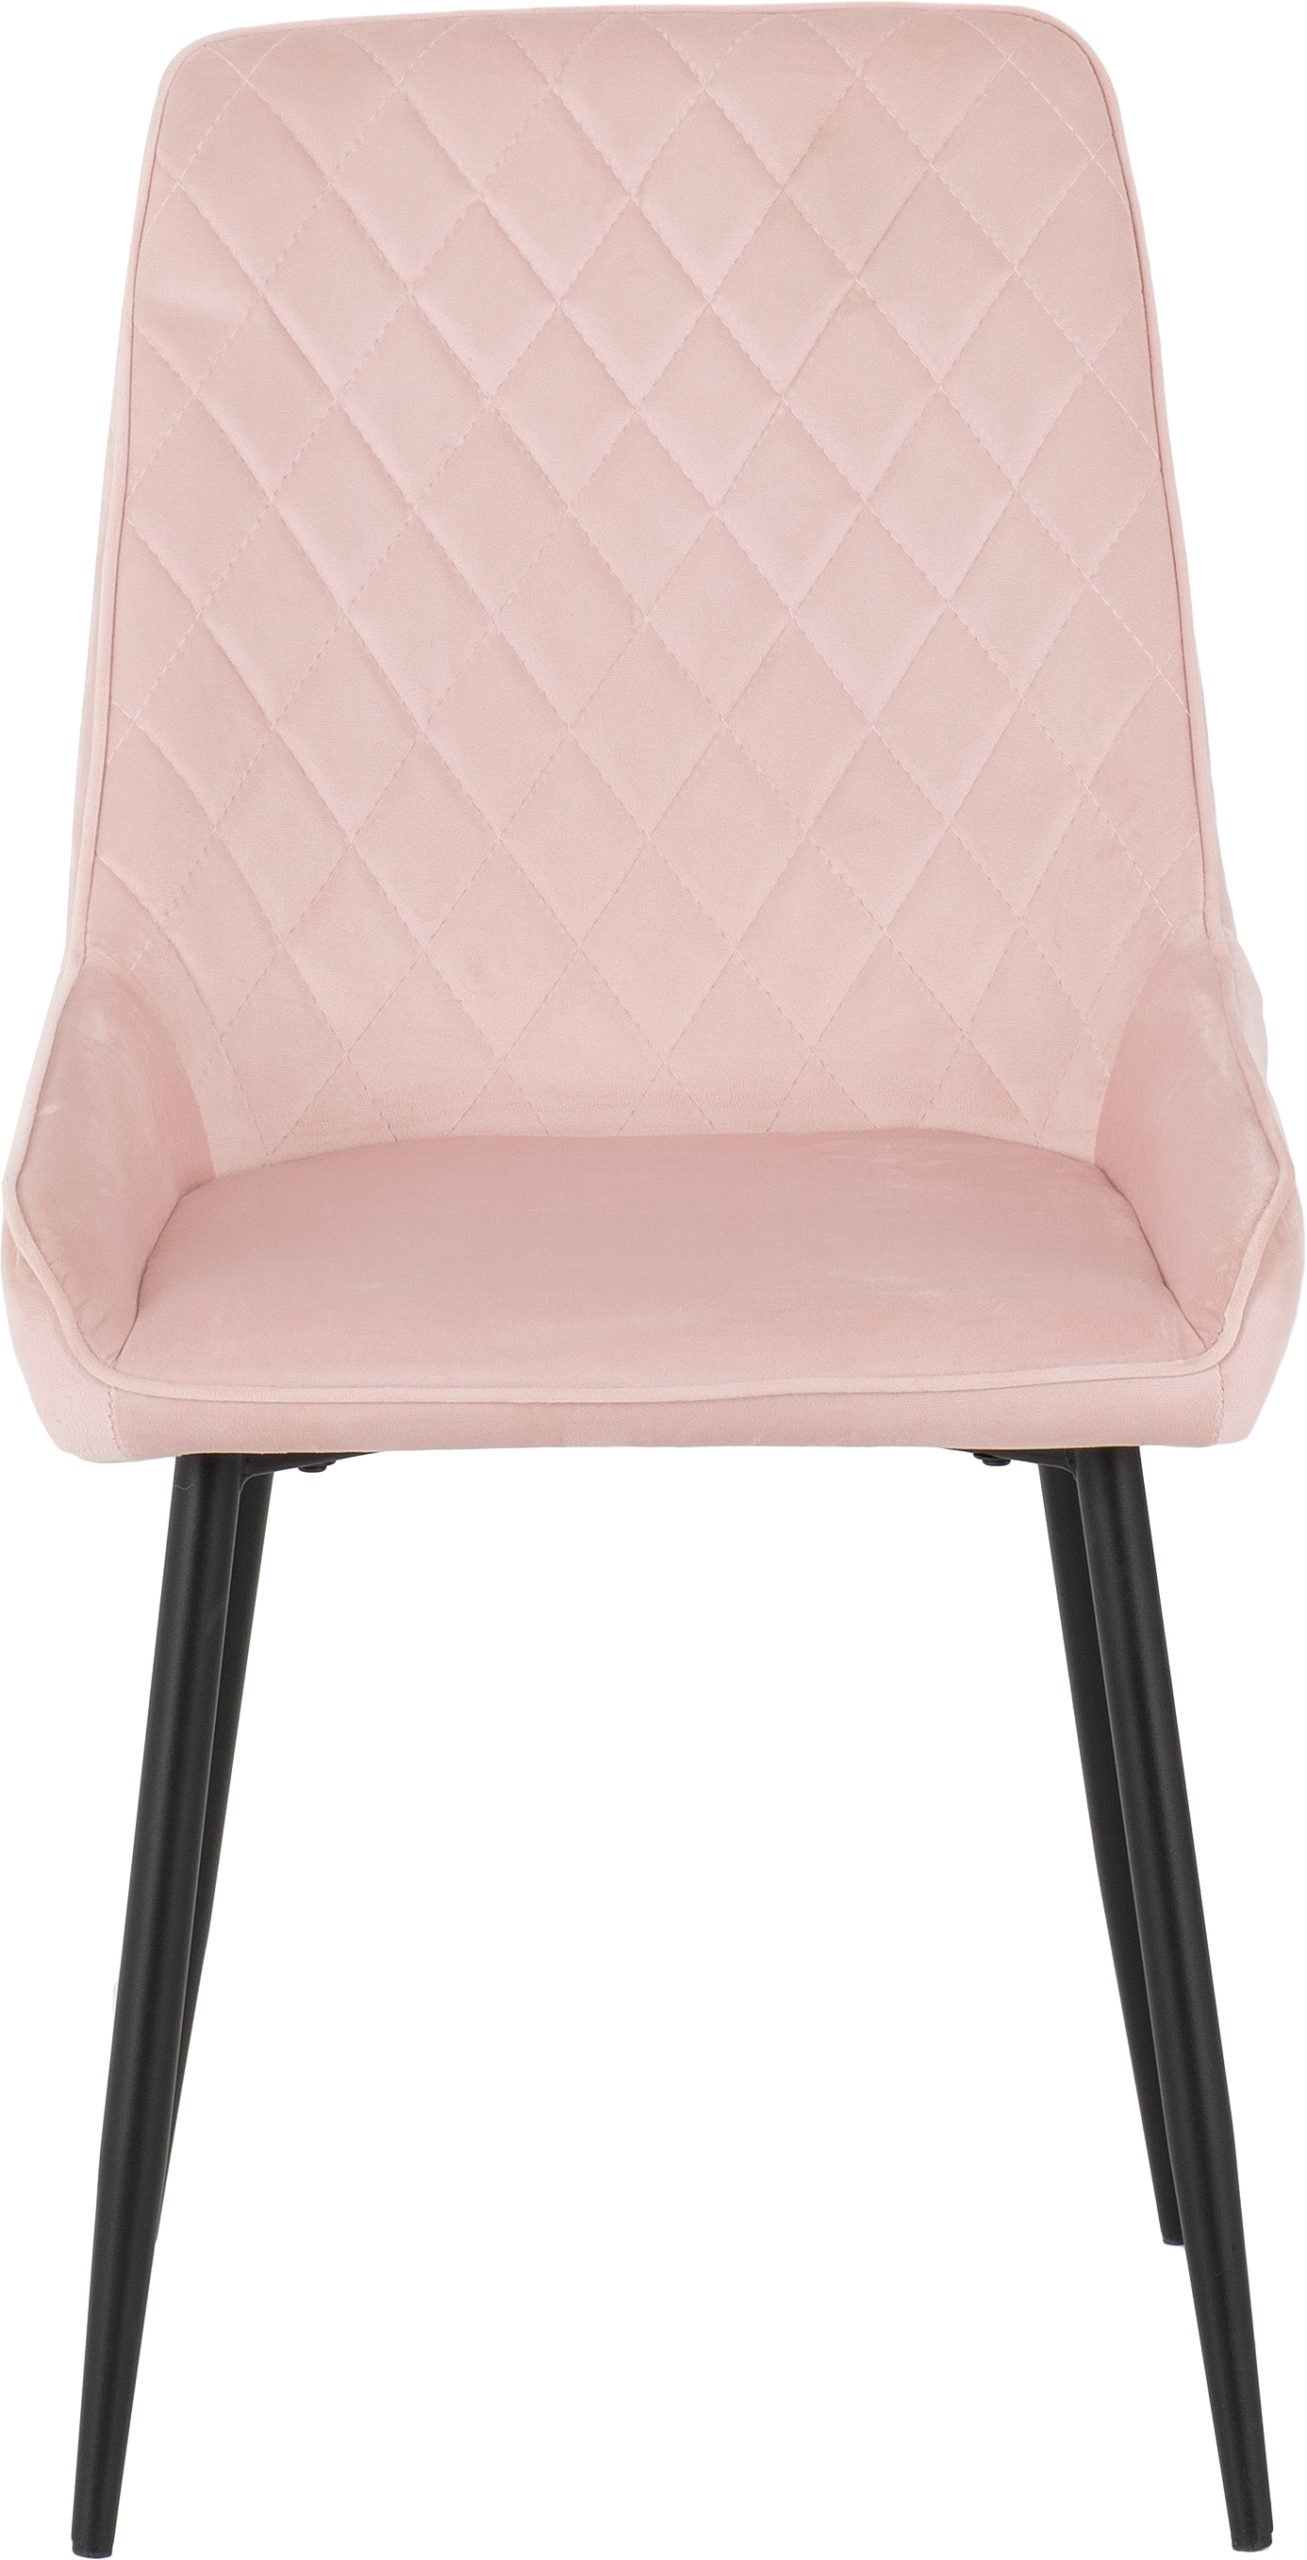 Avery Chairs -Black Frame /Baby Pink Upholstered